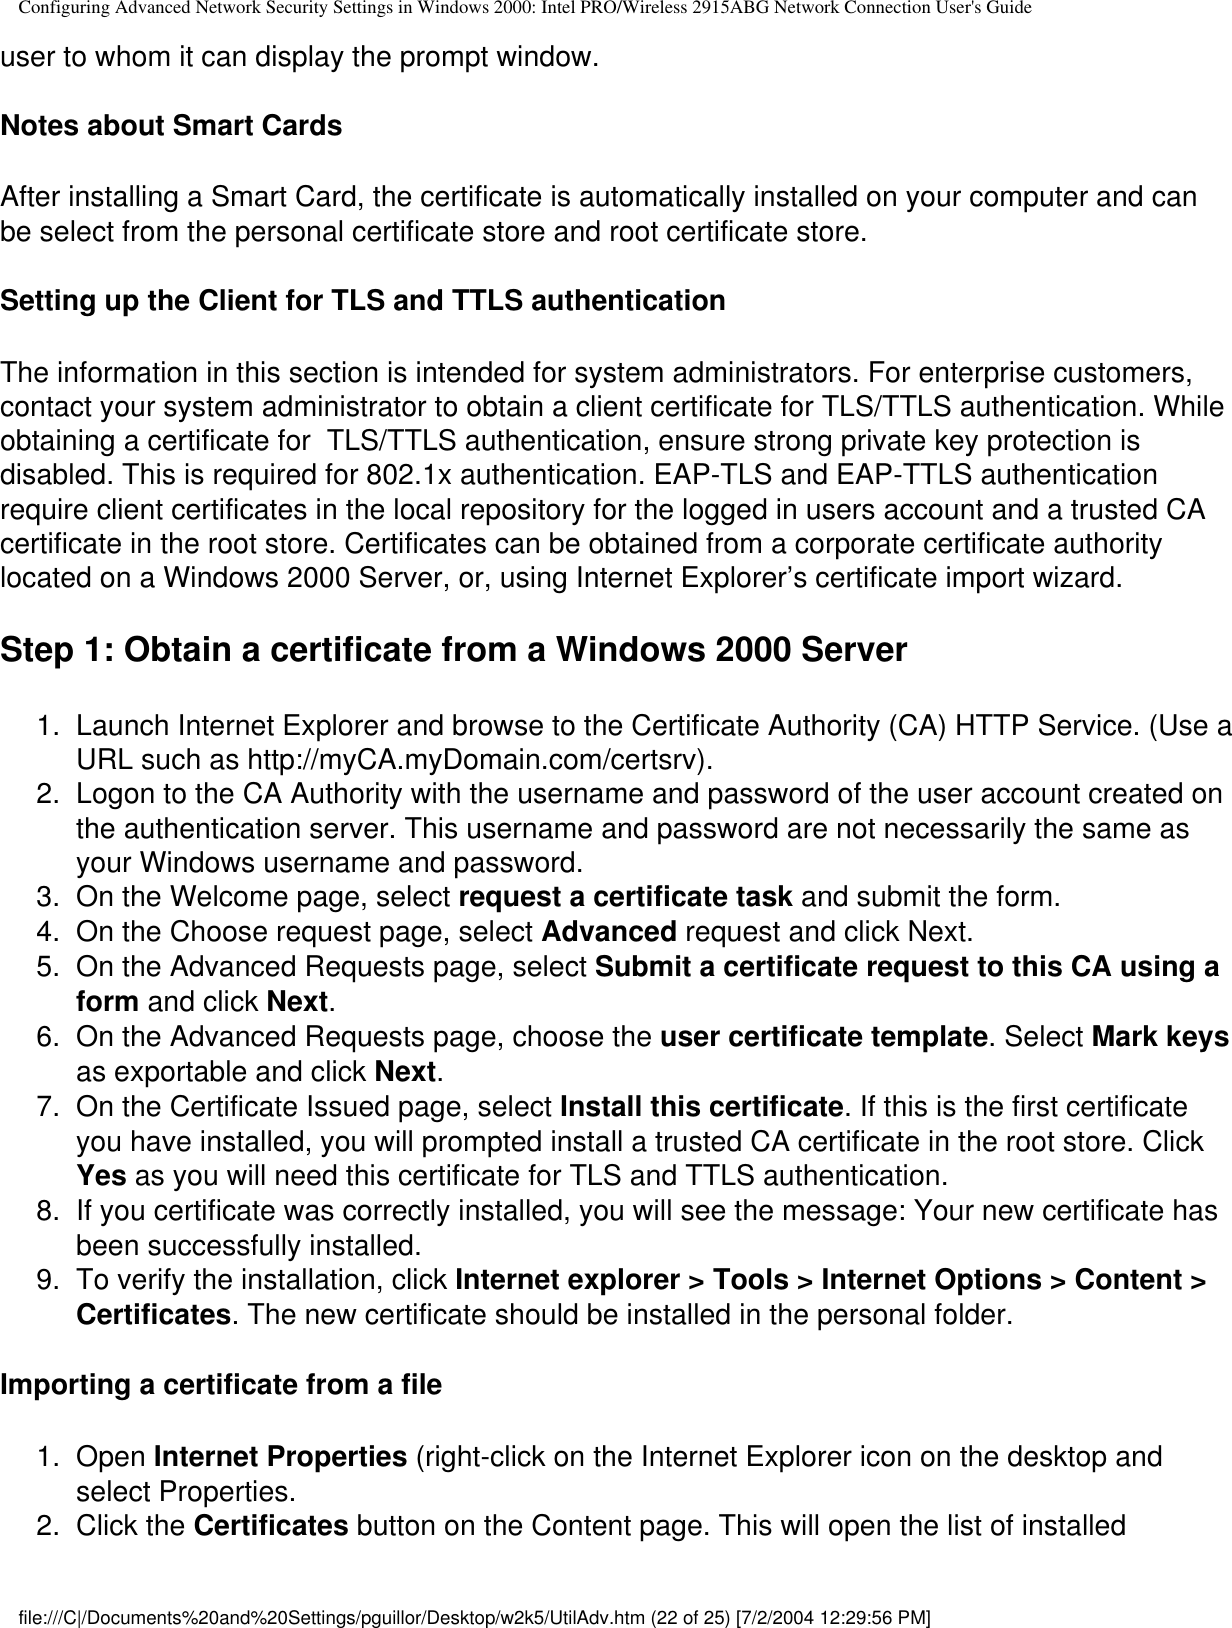 Configuring Advanced Network Security Settings in Windows 2000: Intel PRO/Wireless 2915ABG Network Connection User&apos;s Guideuser to whom it can display the prompt window. Notes about Smart CardsAfter installing a Smart Card, the certificate is automatically installed on your computer and can be select from the personal certificate store and root certificate store. Setting up the Client for TLS and TTLS authenticationThe information in this section is intended for system administrators. For enterprise customers, contact your system administrator to obtain a client certificate for TLS/TTLS authentication. While obtaining a certificate for  TLS/TTLS authentication, ensure strong private key protection is disabled. This is required for 802.1x authentication. EAP-TLS and EAP-TTLS authentication require client certificates in the local repository for the logged in users account and a trusted CA certificate in the root store. Certificates can be obtained from a corporate certificate authority located on a Windows 2000 Server, or, using Internet Explorer’s certificate import wizard.Step 1: Obtain a certificate from a Windows 2000 Server1.  Launch Internet Explorer and browse to the Certificate Authority (CA) HTTP Service. (Use a URL such as http://myCA.myDomain.com/certsrv). 2.  Logon to the CA Authority with the username and password of the user account created on the authentication server. This username and password are not necessarily the same as your Windows username and password.3.  On the Welcome page, select request a certificate task and submit the form.4.  On the Choose request page, select Advanced request and click Next.5.  On the Advanced Requests page, select Submit a certificate request to this CA using a form and click Next.6.  On the Advanced Requests page, choose the user certificate template. Select Mark keys as exportable and click Next.7.  On the Certificate Issued page, select Install this certificate. If this is the first certificate you have installed, you will prompted install a trusted CA certificate in the root store. Click Yes as you will need this certificate for TLS and TTLS authentication.8.  If you certificate was correctly installed, you will see the message: Your new certificate has been successfully installed.9.  To verify the installation, click Internet explorer &gt; Tools &gt; Internet Options &gt; Content &gt; Certificates. The new certificate should be installed in the personal folder.Importing a certificate from a file1.  Open Internet Properties (right-click on the Internet Explorer icon on the desktop and select Properties. 2.  Click the Certificates button on the Content page. This will open the list of installed file:///C|/Documents%20and%20Settings/pguillor/Desktop/w2k5/UtilAdv.htm (22 of 25) [7/2/2004 12:29:56 PM]